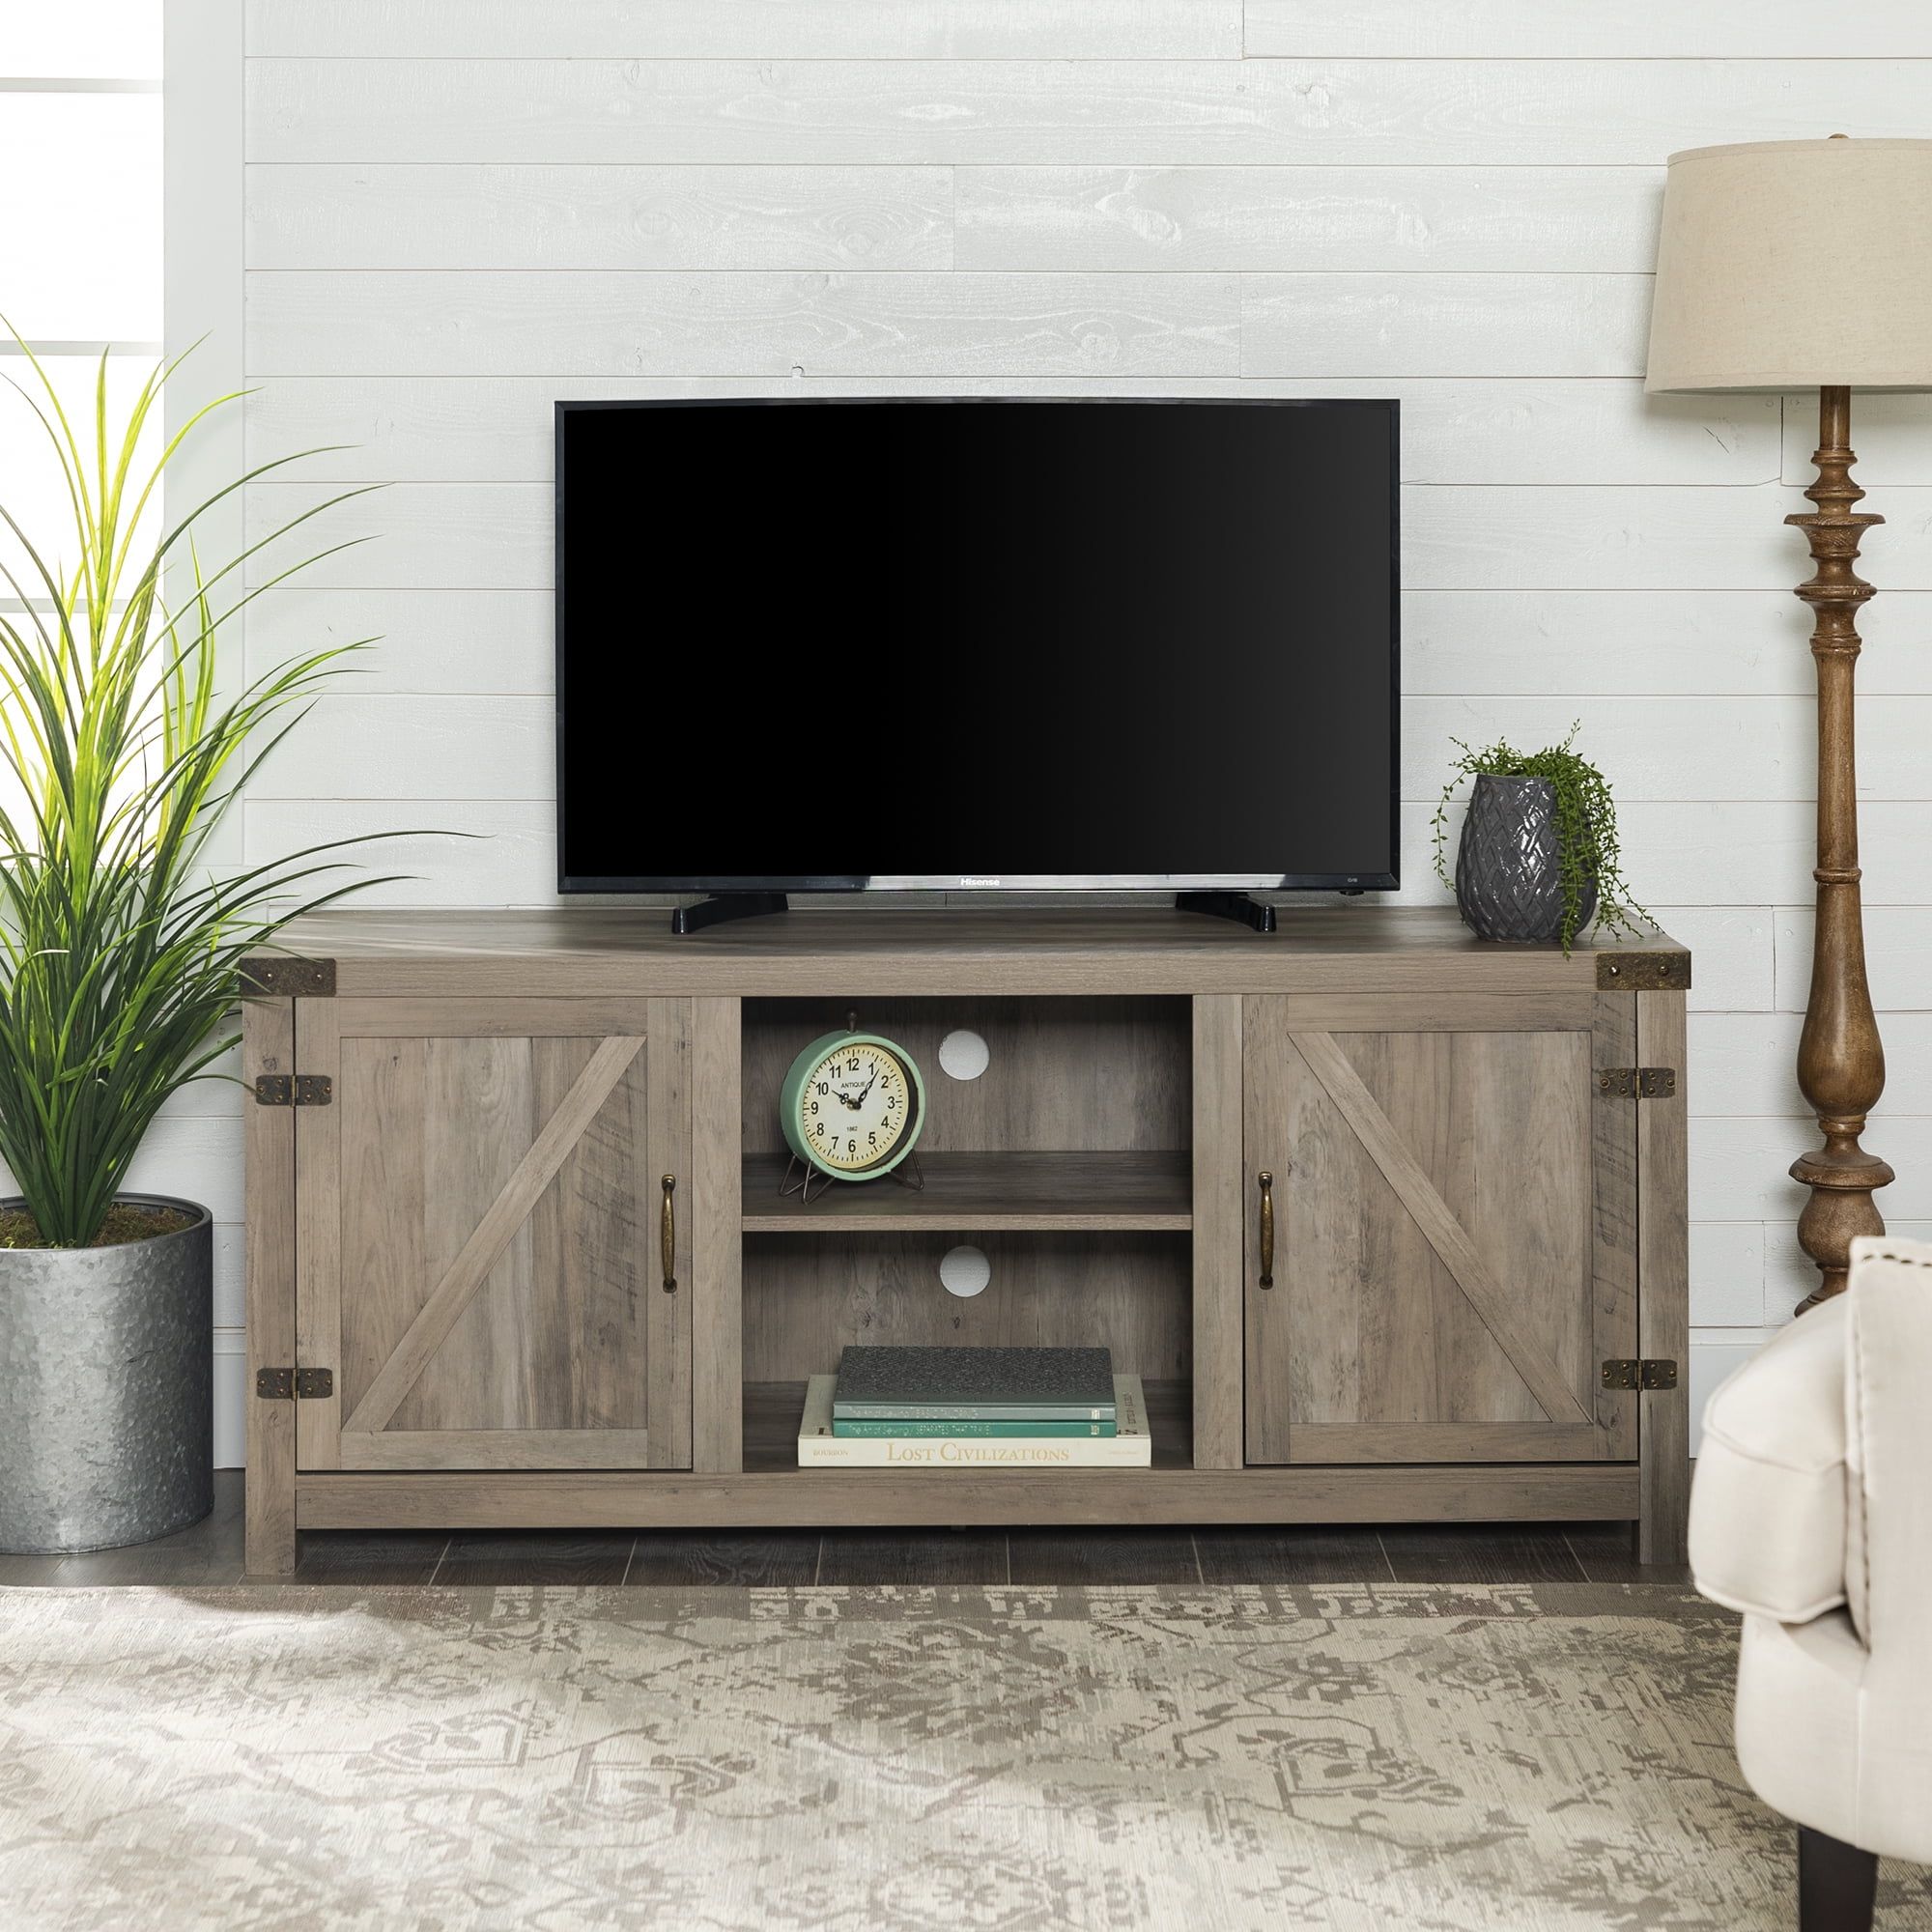 Manor Park Farmhouse Barn Door Tv Stand For Tvs Up To 65", Grey Wash Within Farmhouse Tv Stands (View 7 of 20)